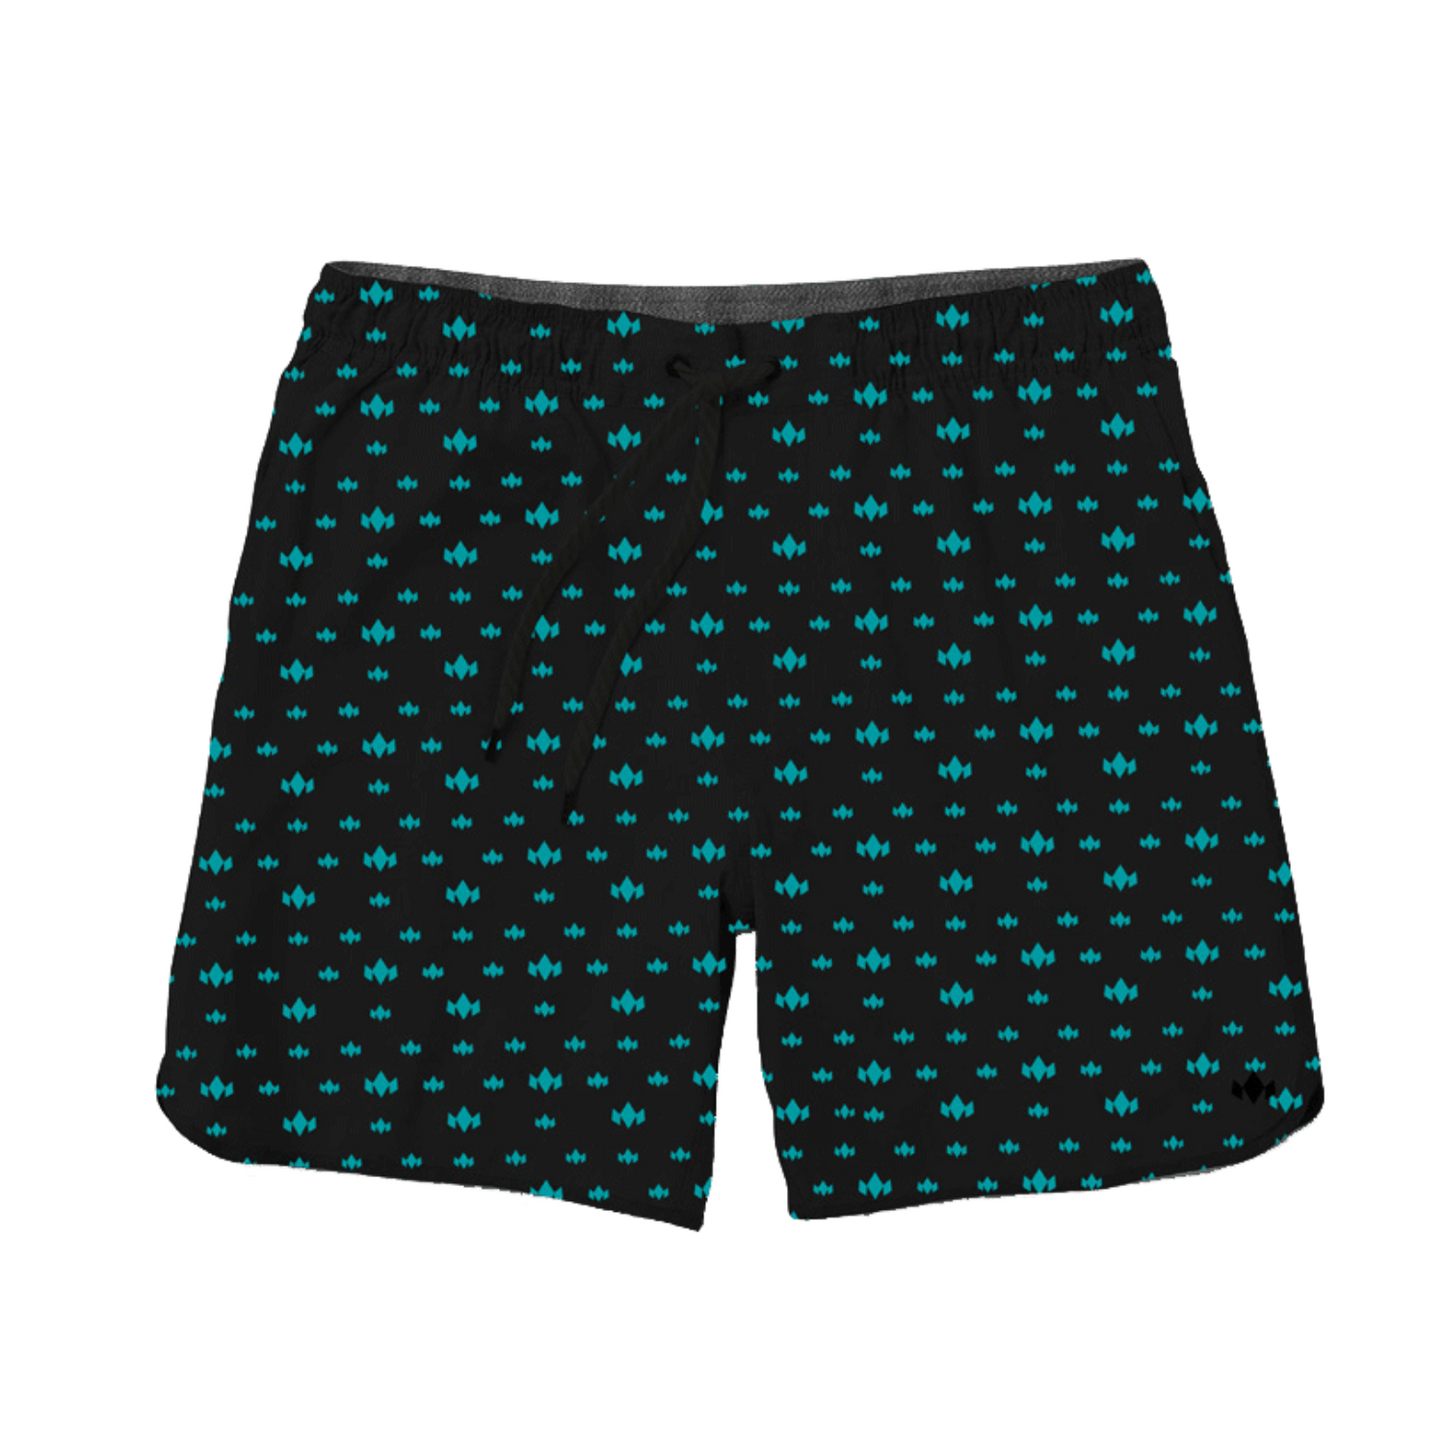 SCALES Men's Print Volley Shorts by Diadem Sports